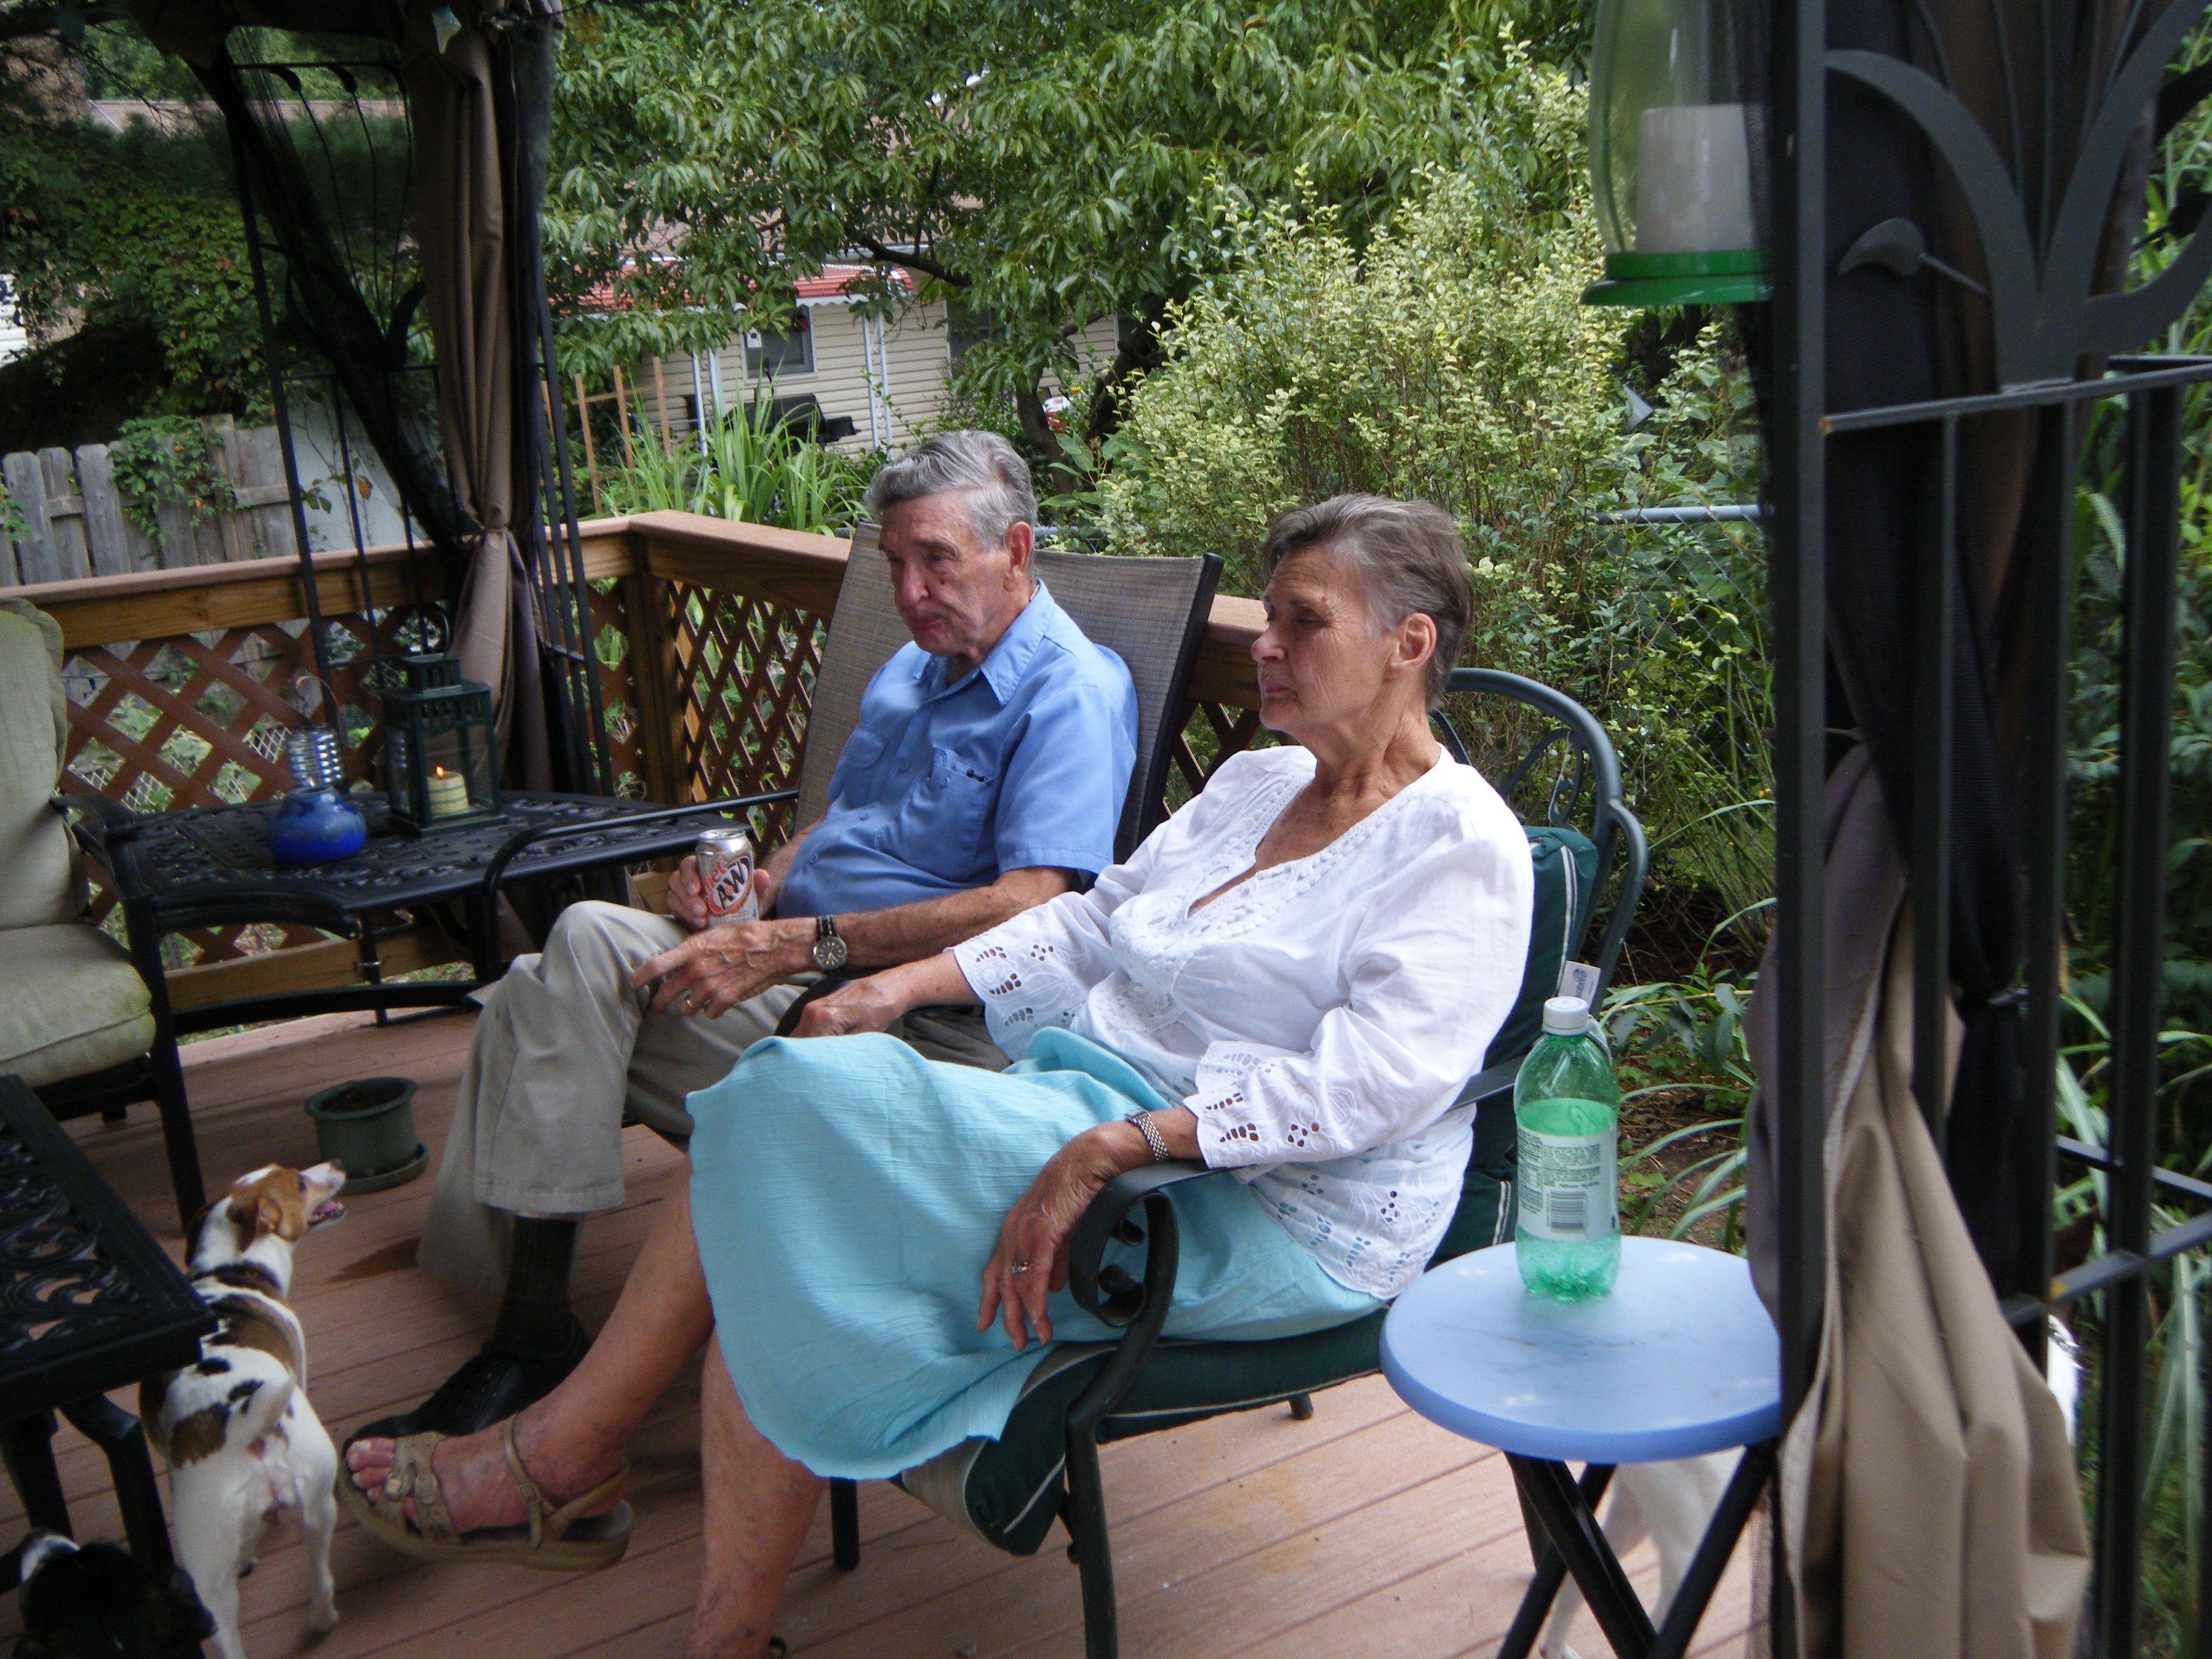 Don and his wife, Gay, relaxing - September 2012